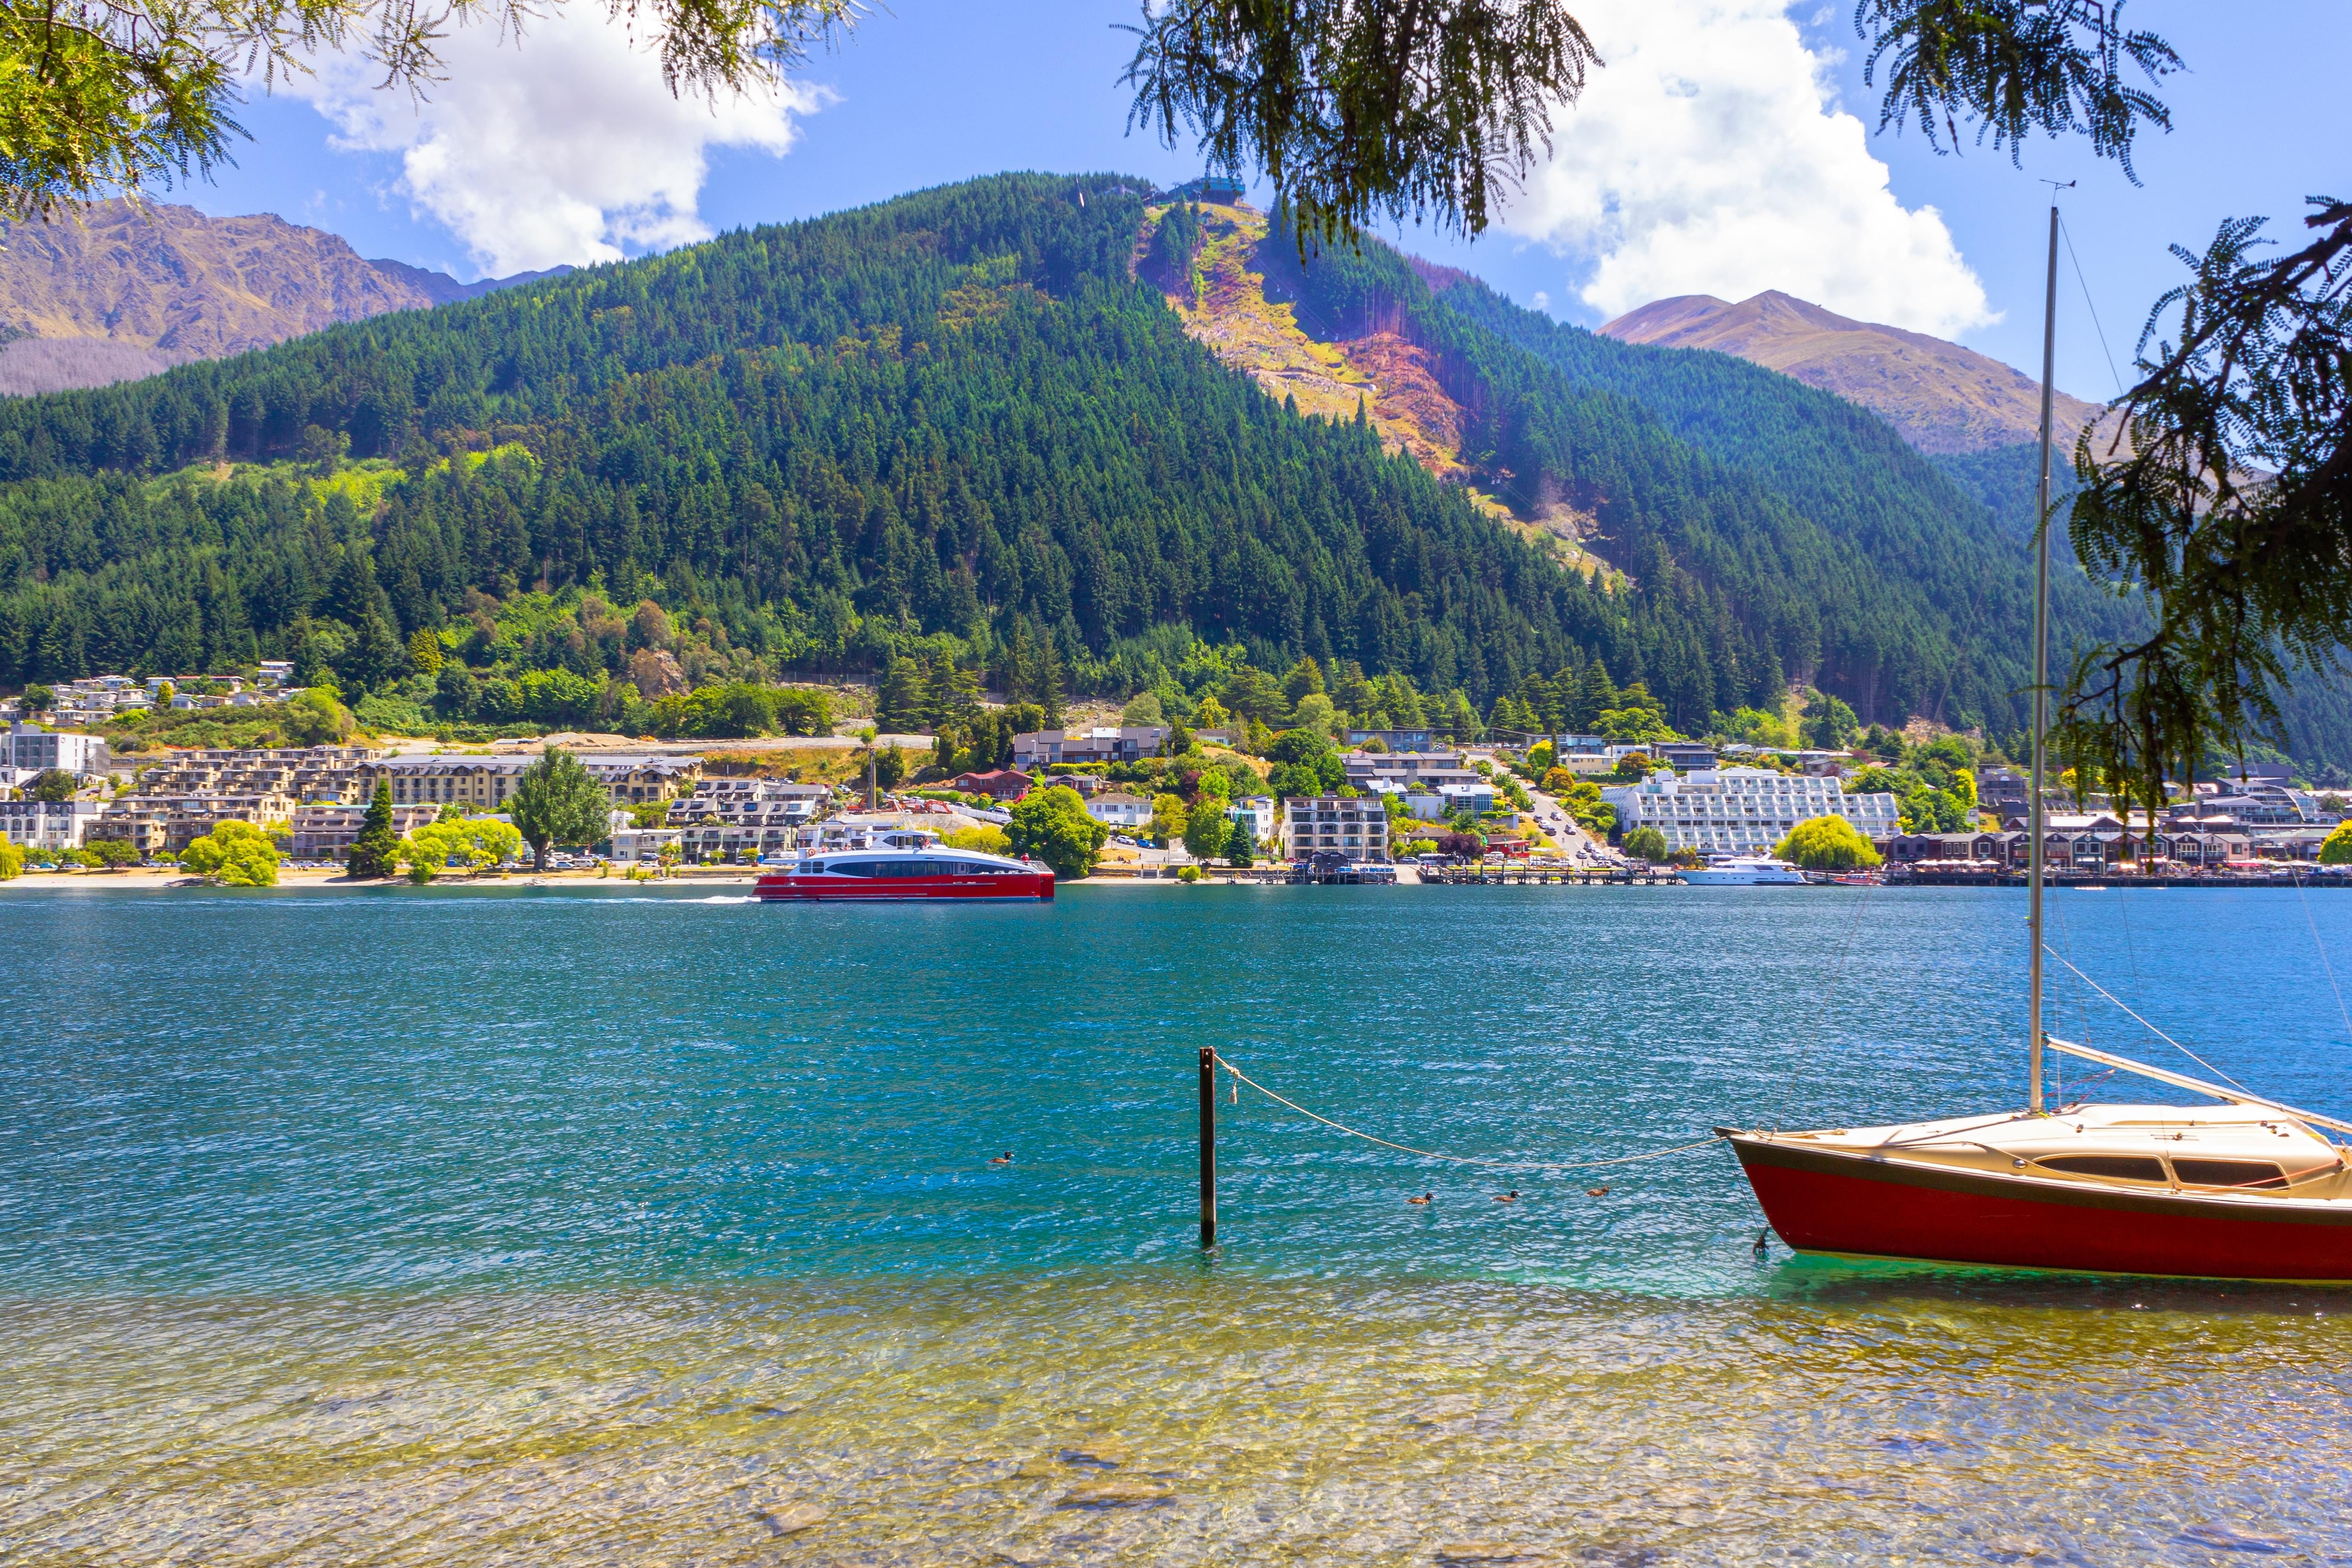 Things to Do in Queenstown